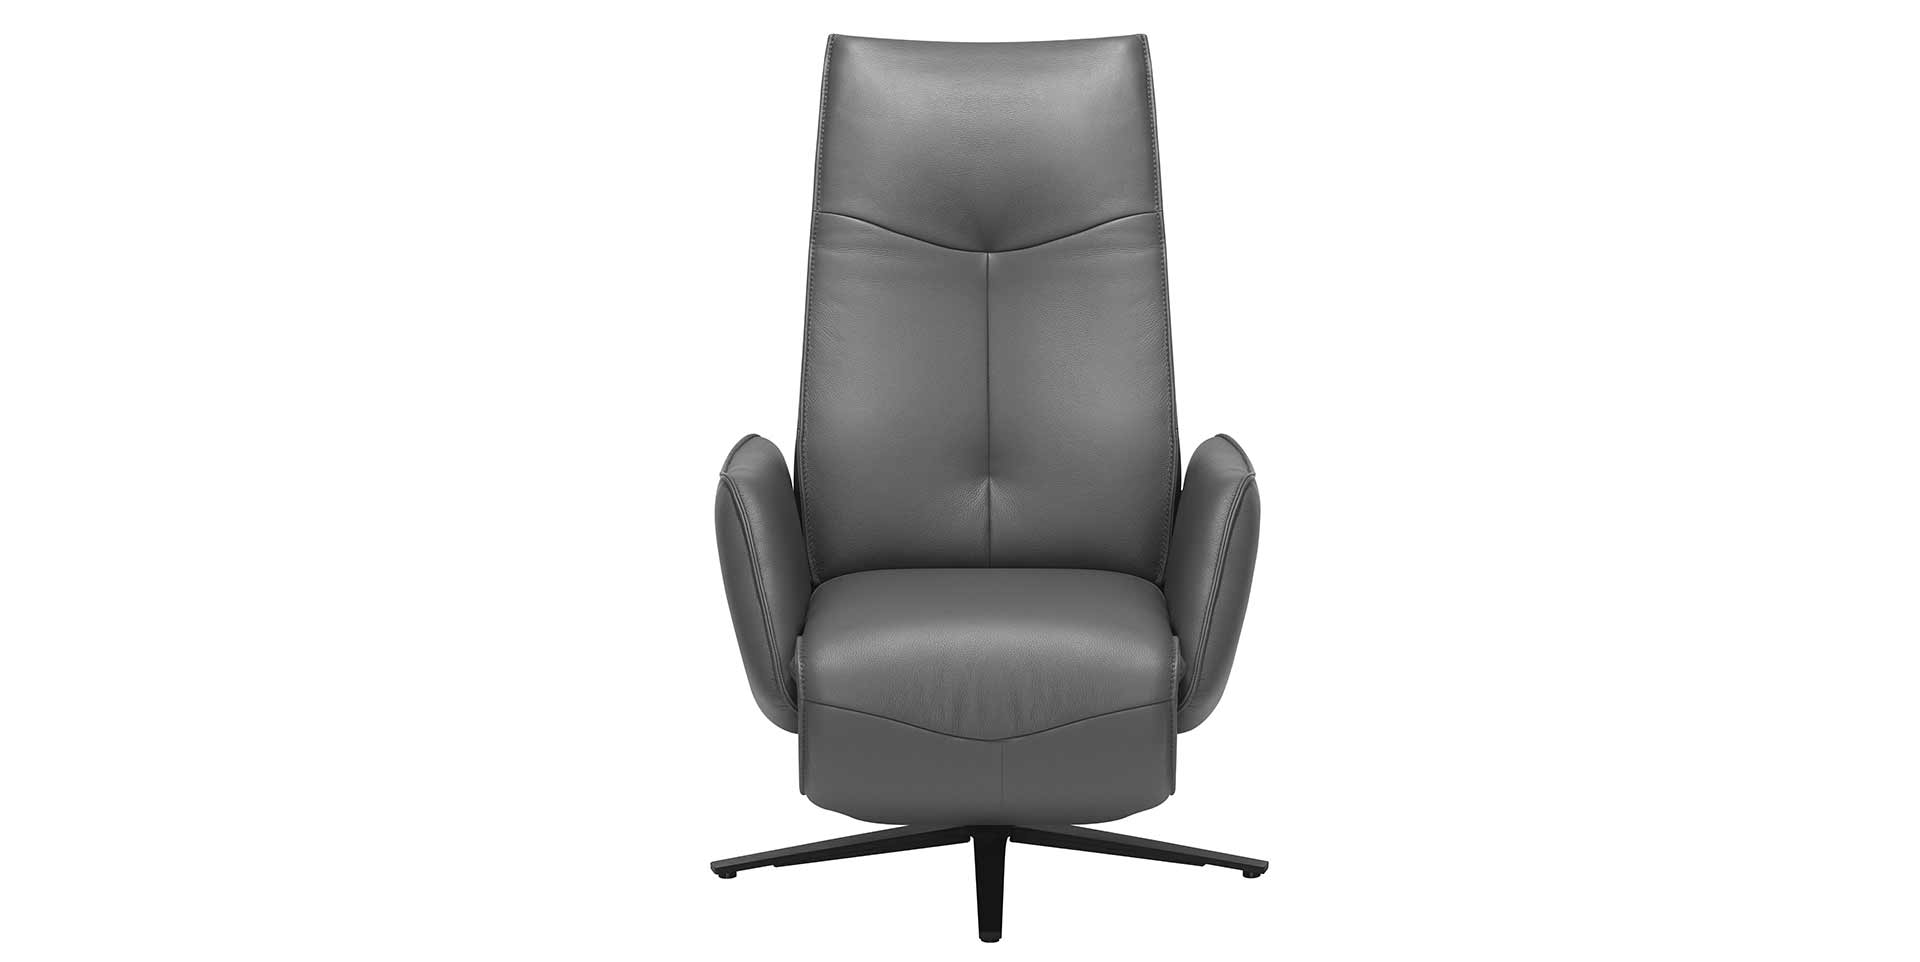 Slider Fauteuil relaxation 7917 (image 6)